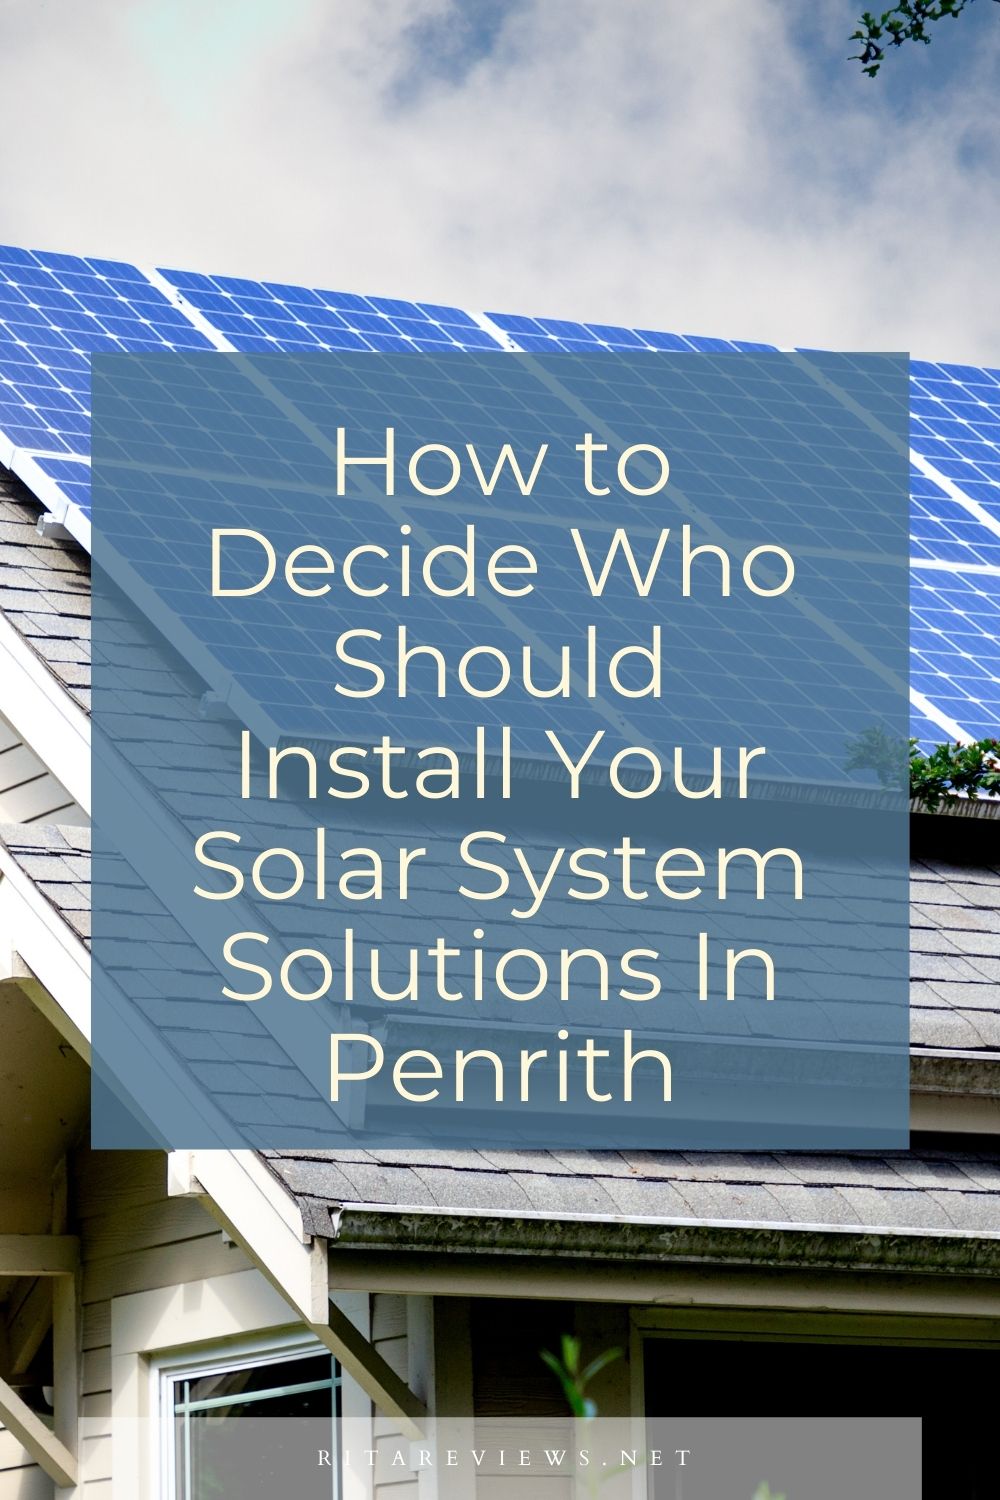 How to Decide Who Should Install Your Solar System Solutions In Penrith